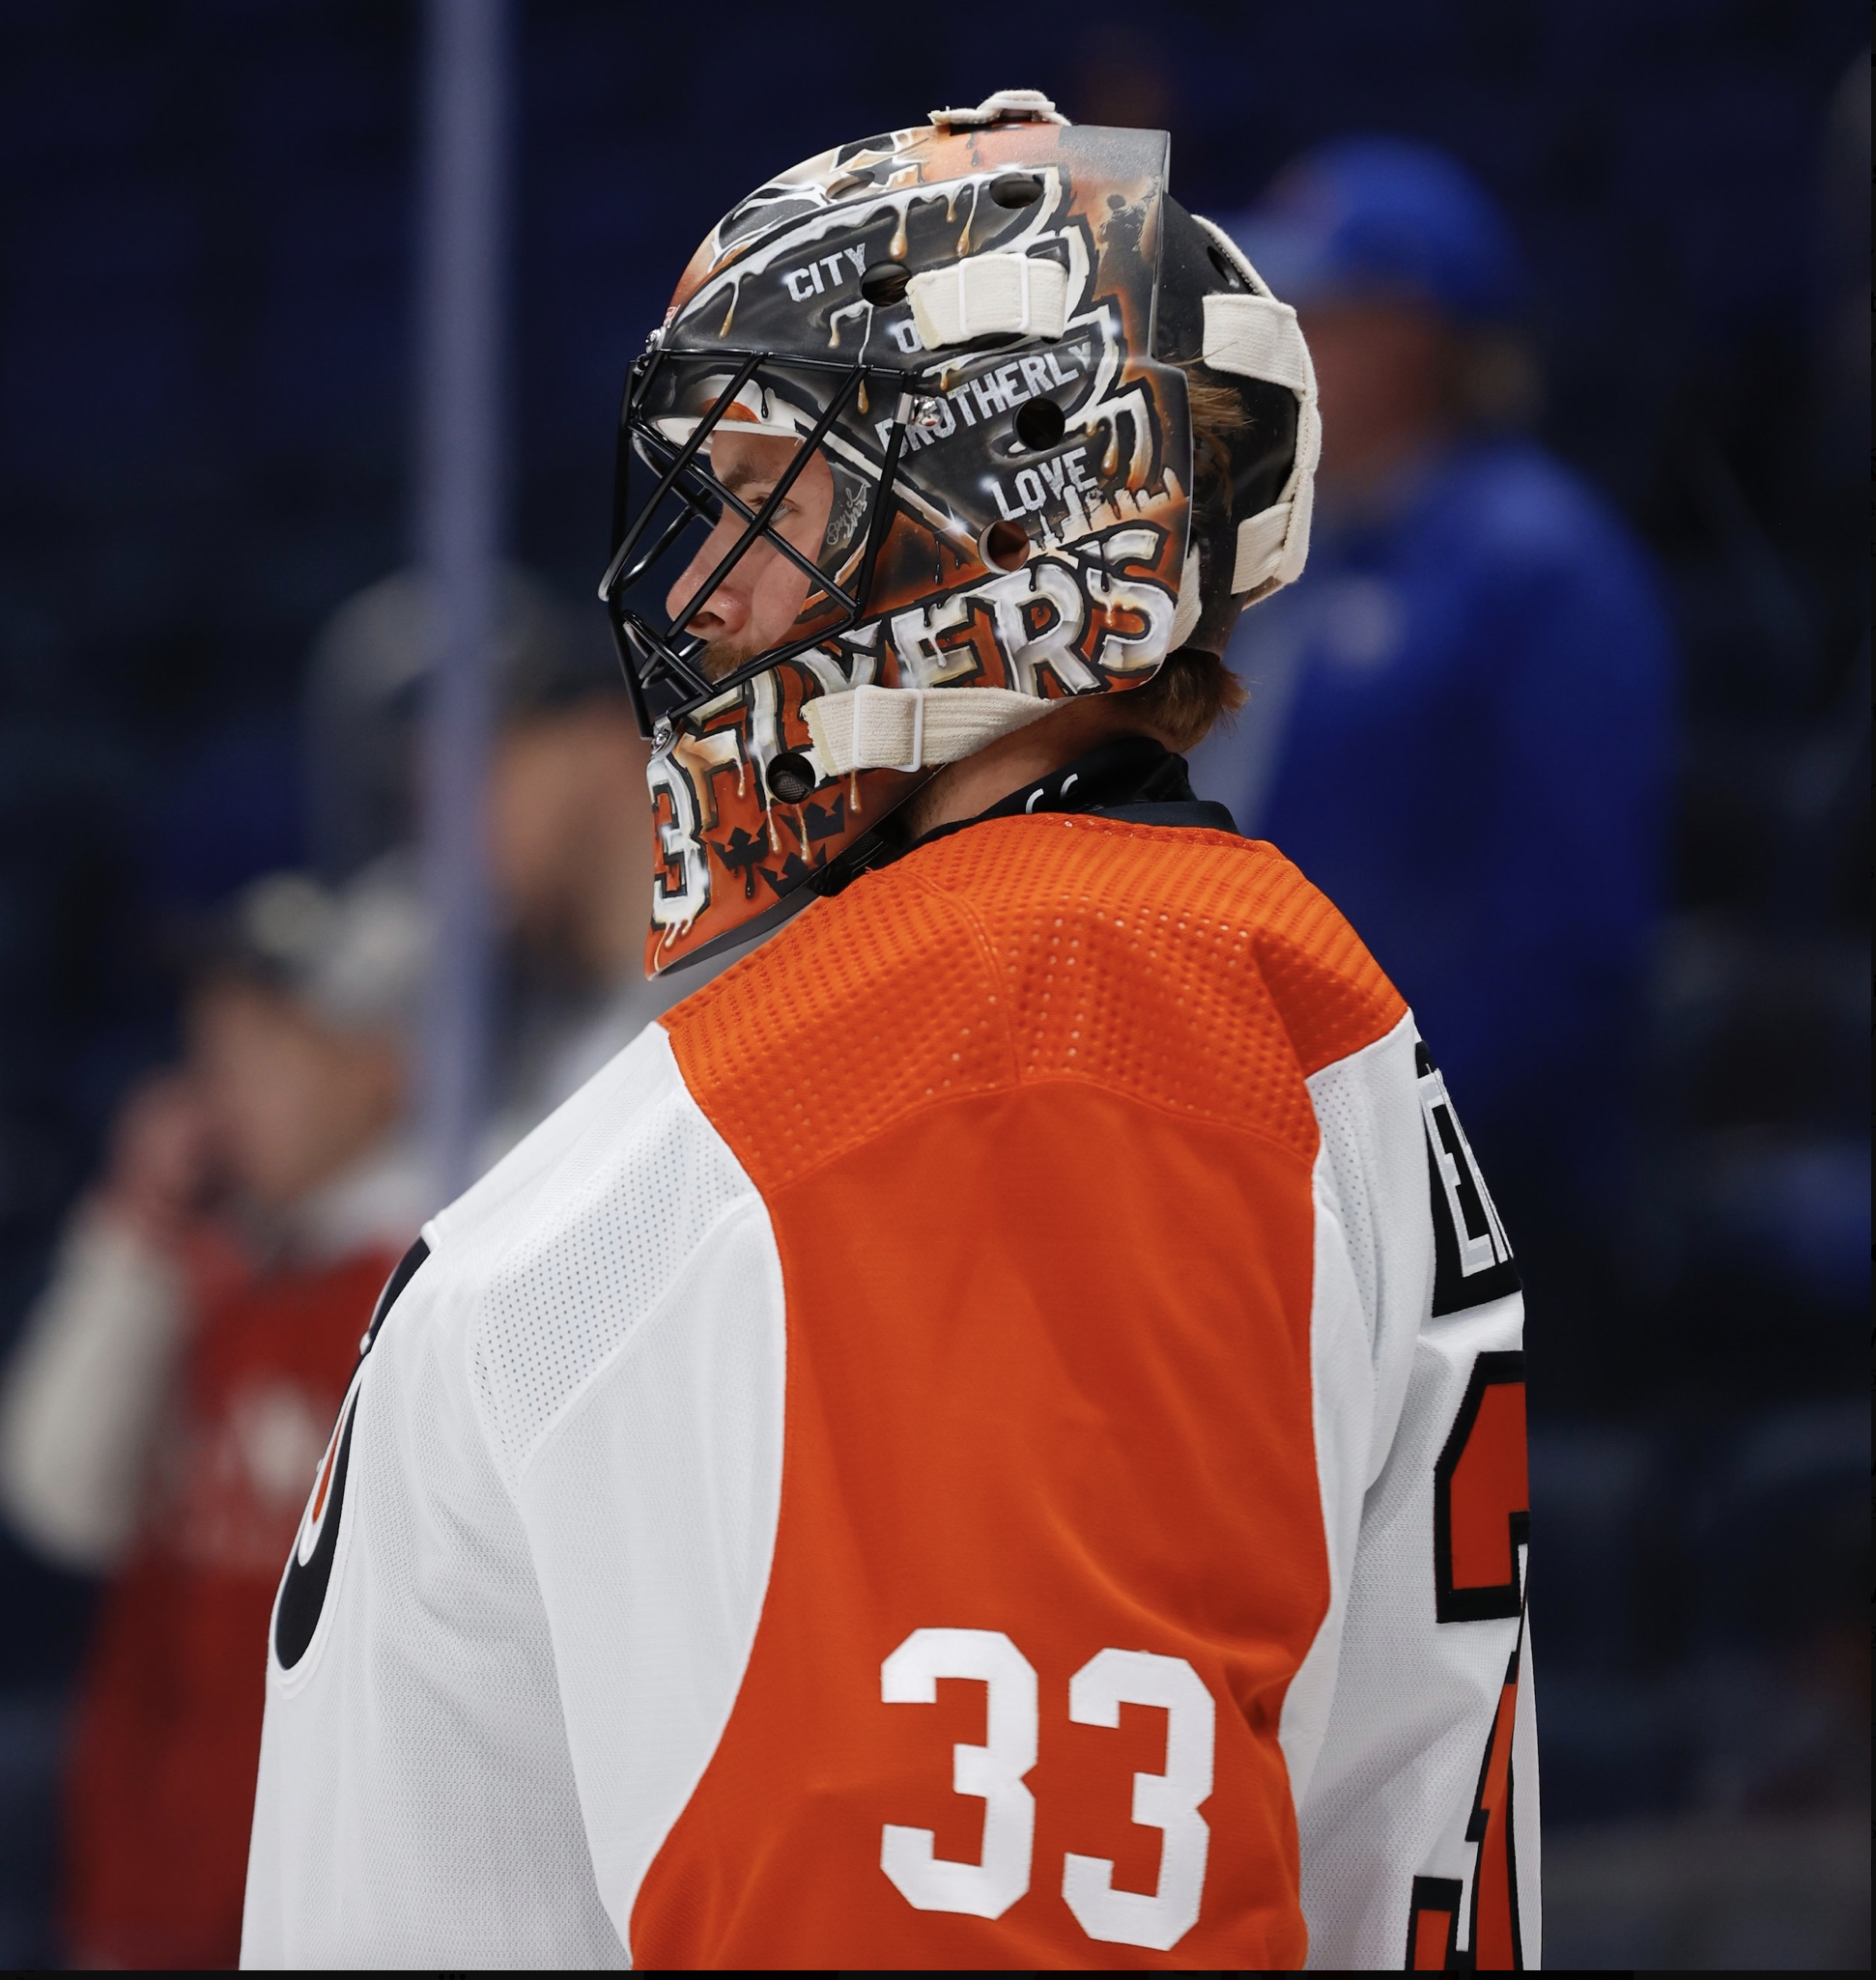 Sam Ersson, on the ice against Islanders on Wednesday (Photo provided by Flyers)